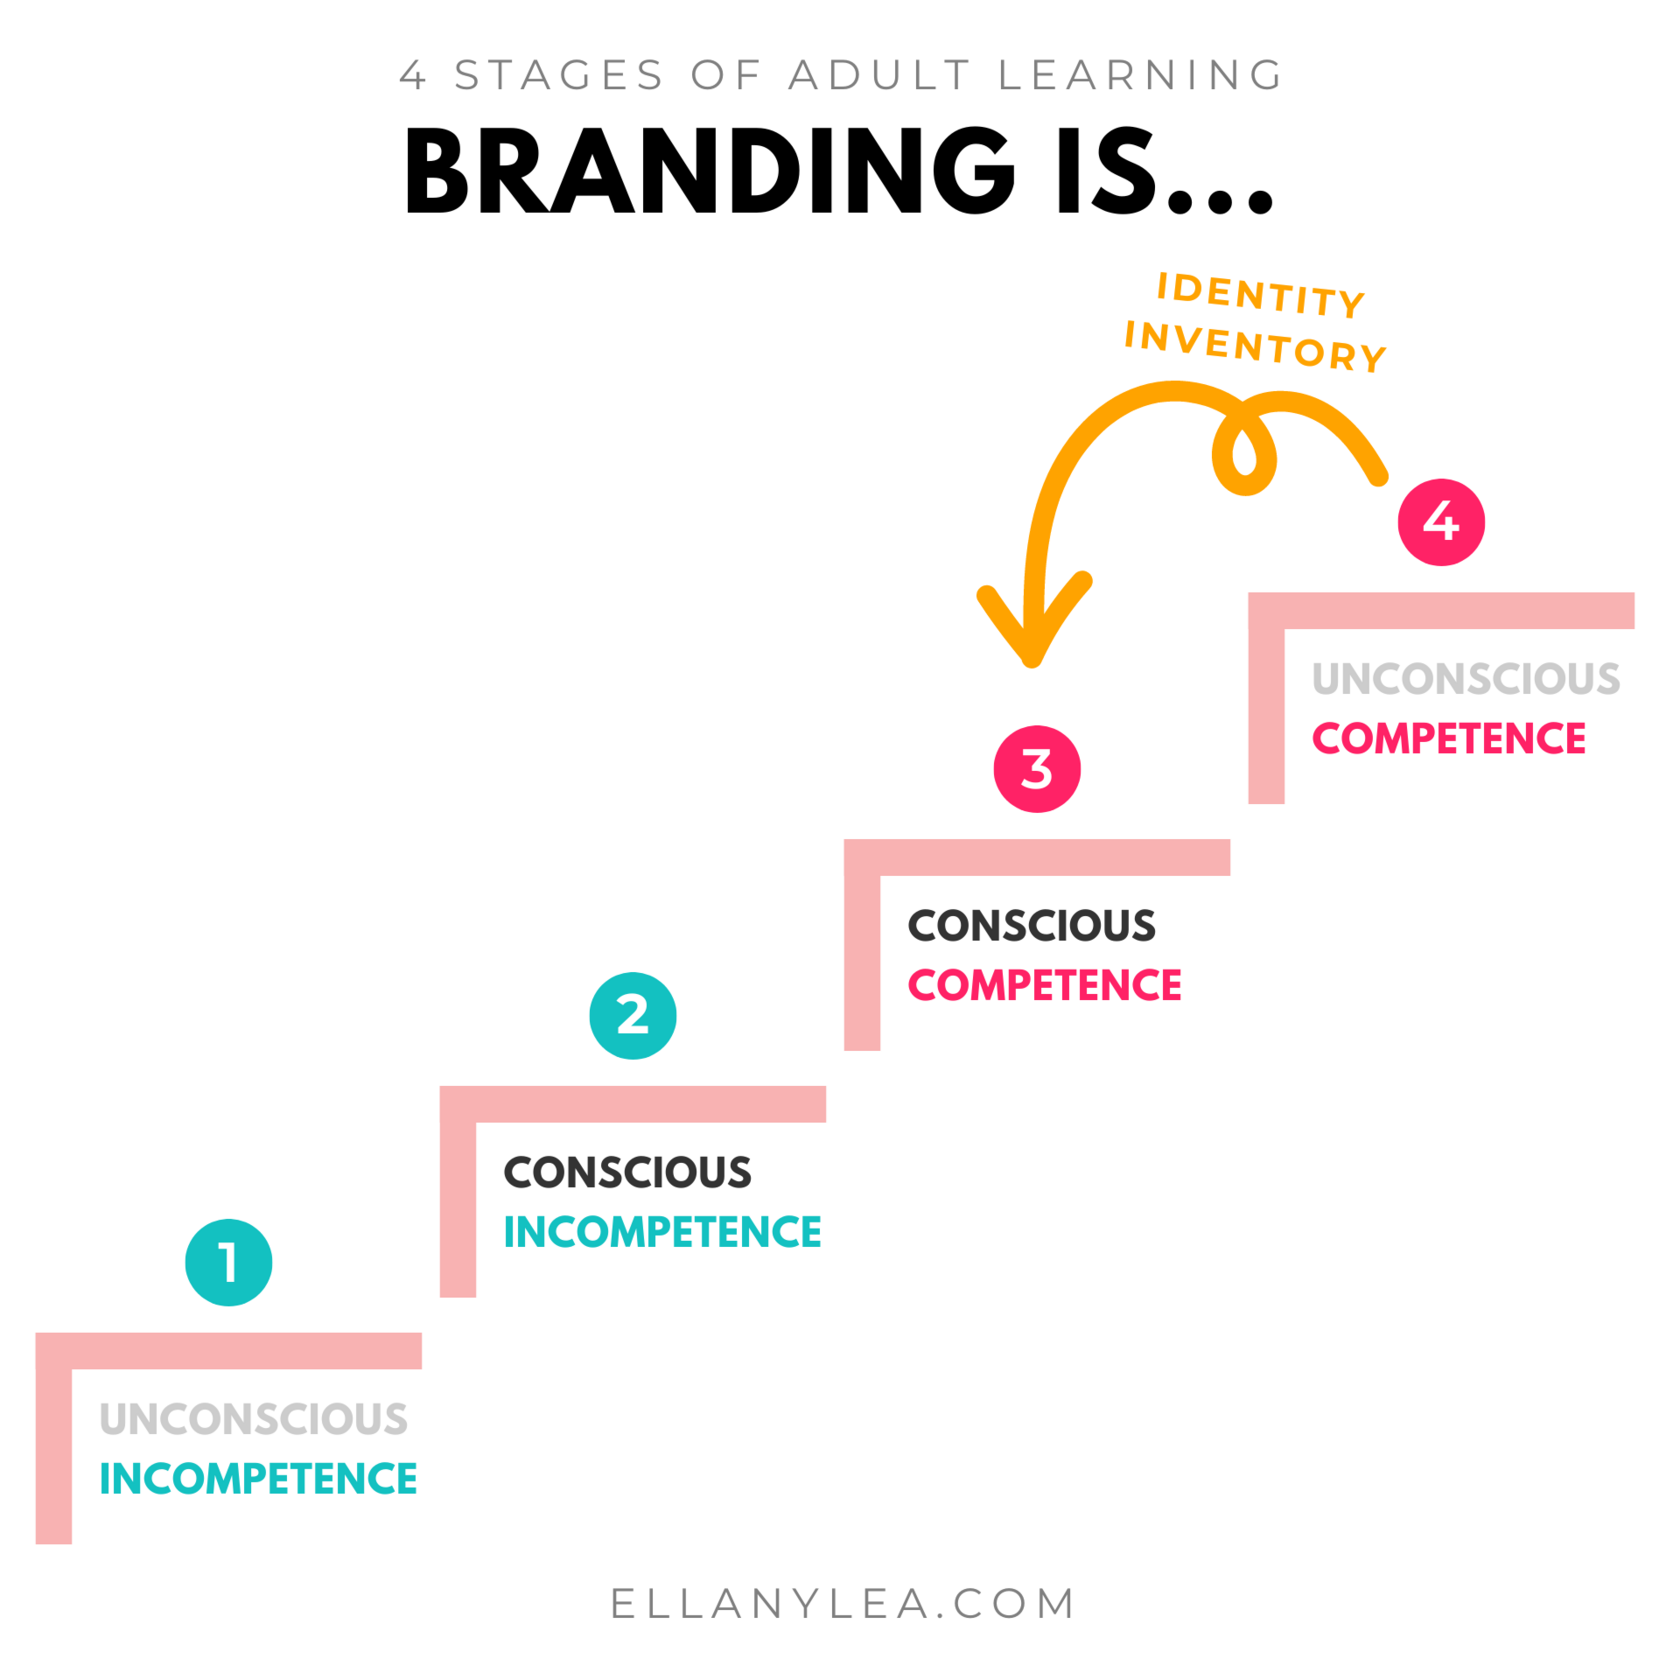 4-Stages-Adult-Learning-Definition-Branding